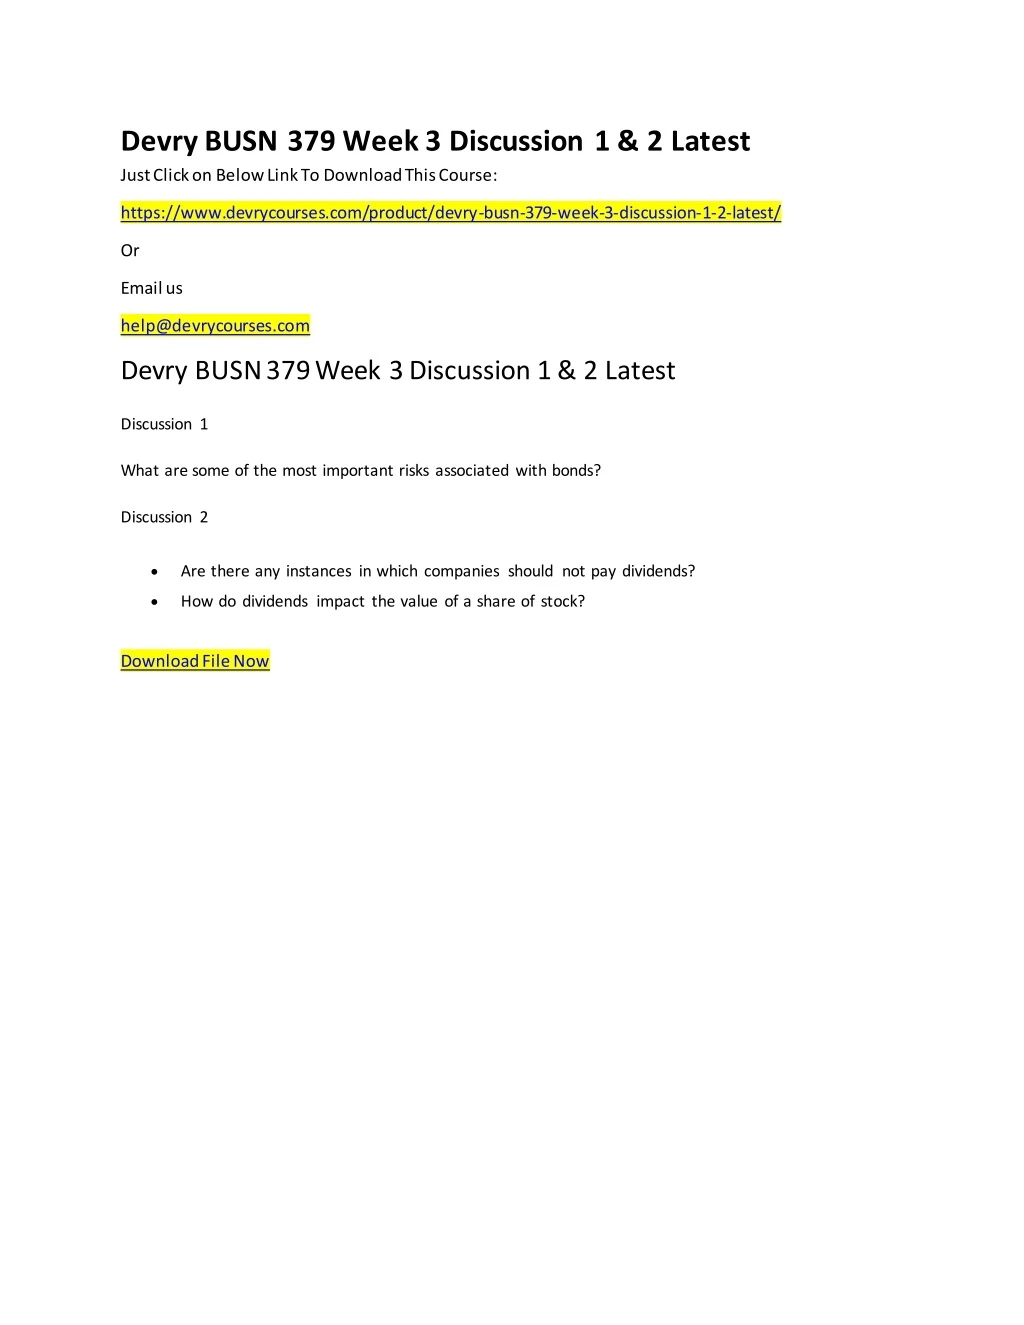 devry busn 379 week 3 discussion 1 2 latest just